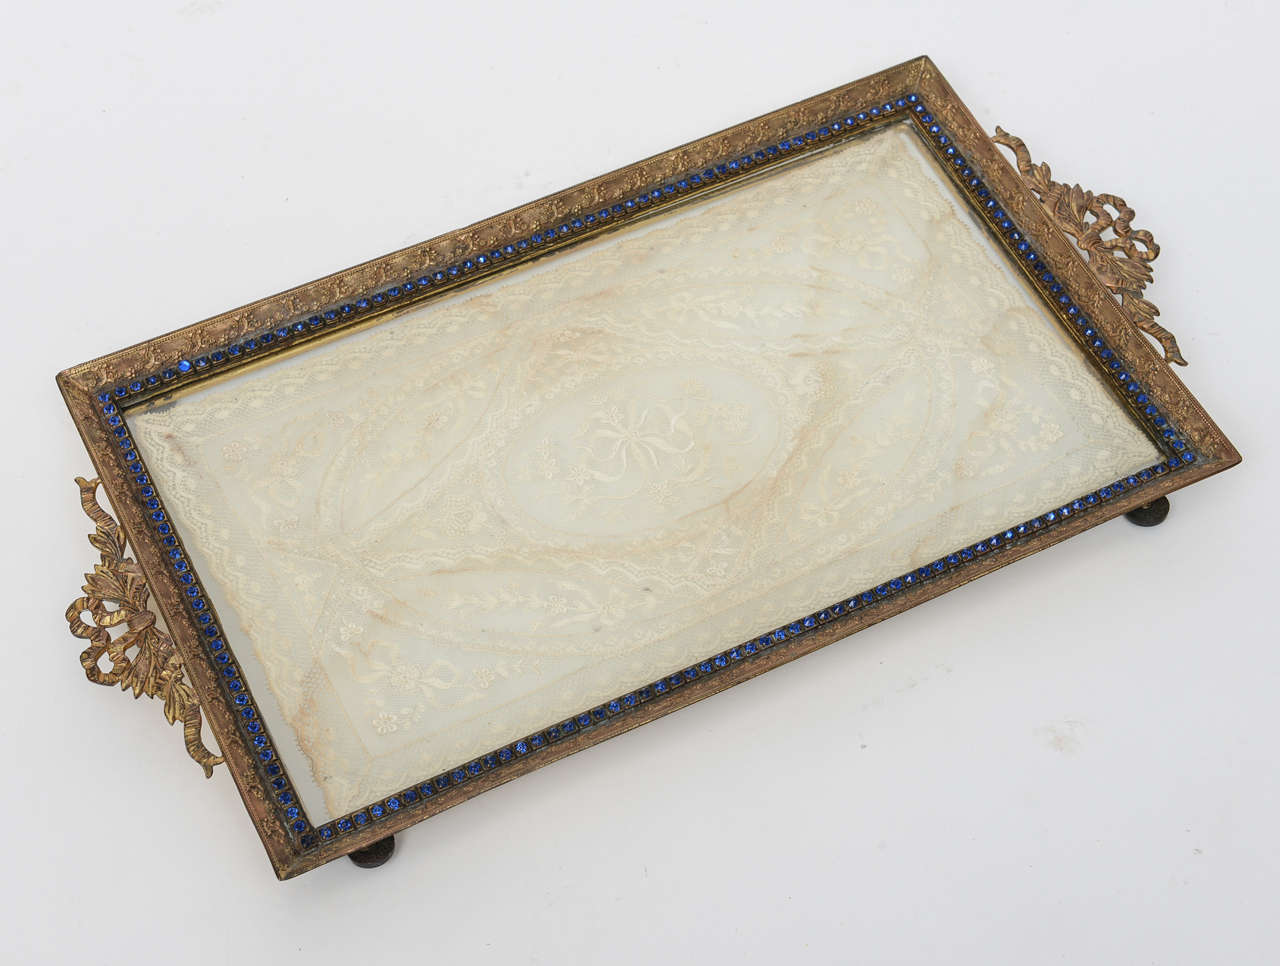 Fabulous ormolu tray with antique lace mat.  The frame is surrounded with blue stones, all original.  This may have used as a vanity tray but has many uses including purely display.  The ormolu casting is very fine, better in person and there is a